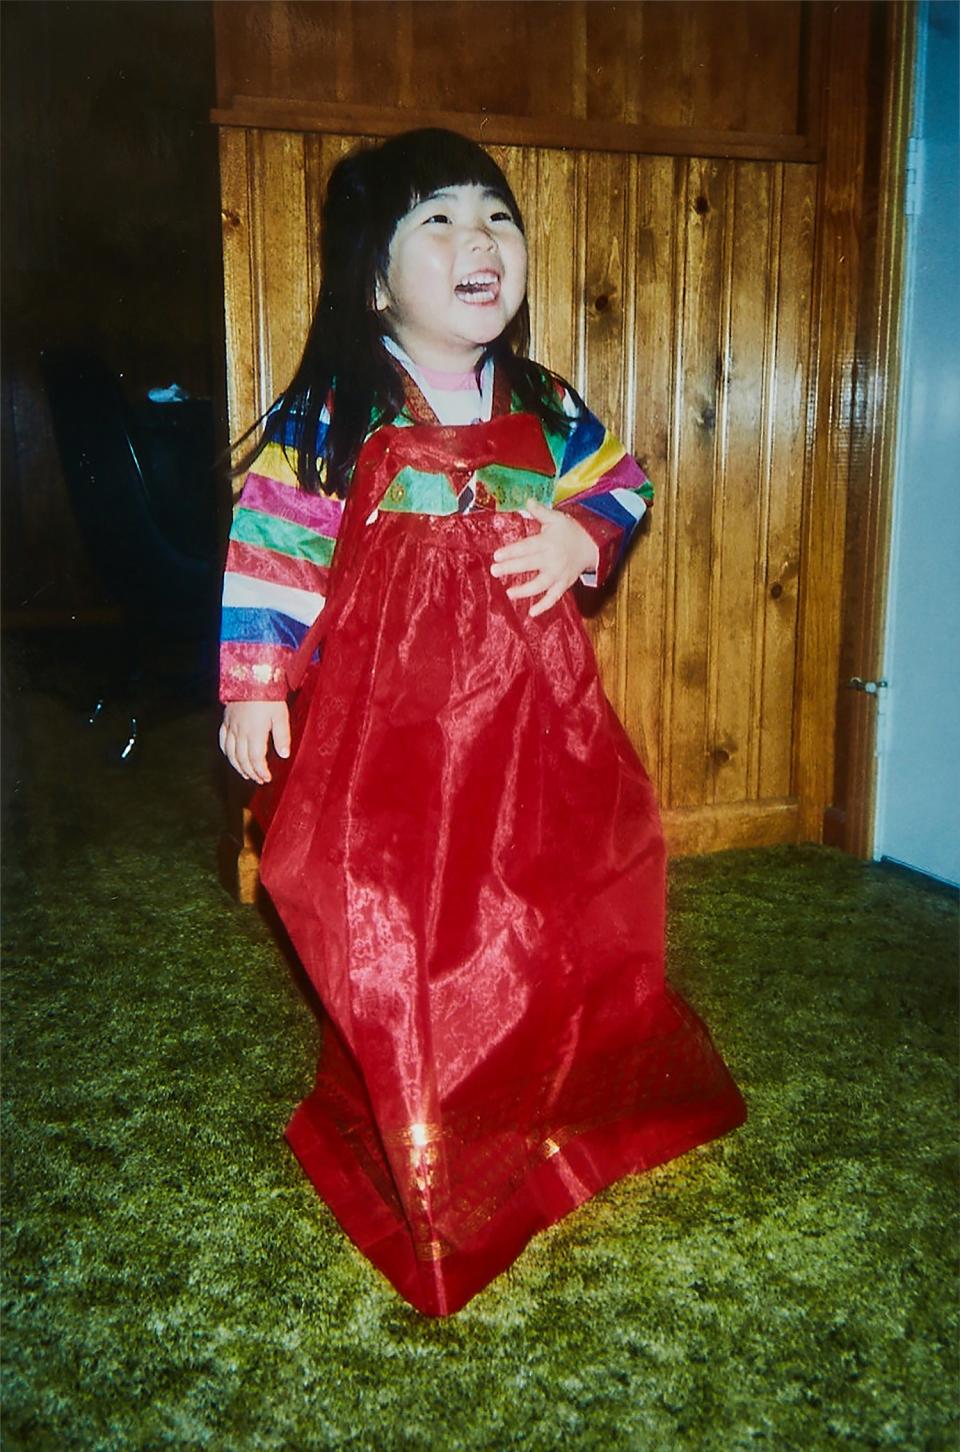 Me rocking a traditional hanbok. My parents had one of my “big sibs” buy it for me in Korea.